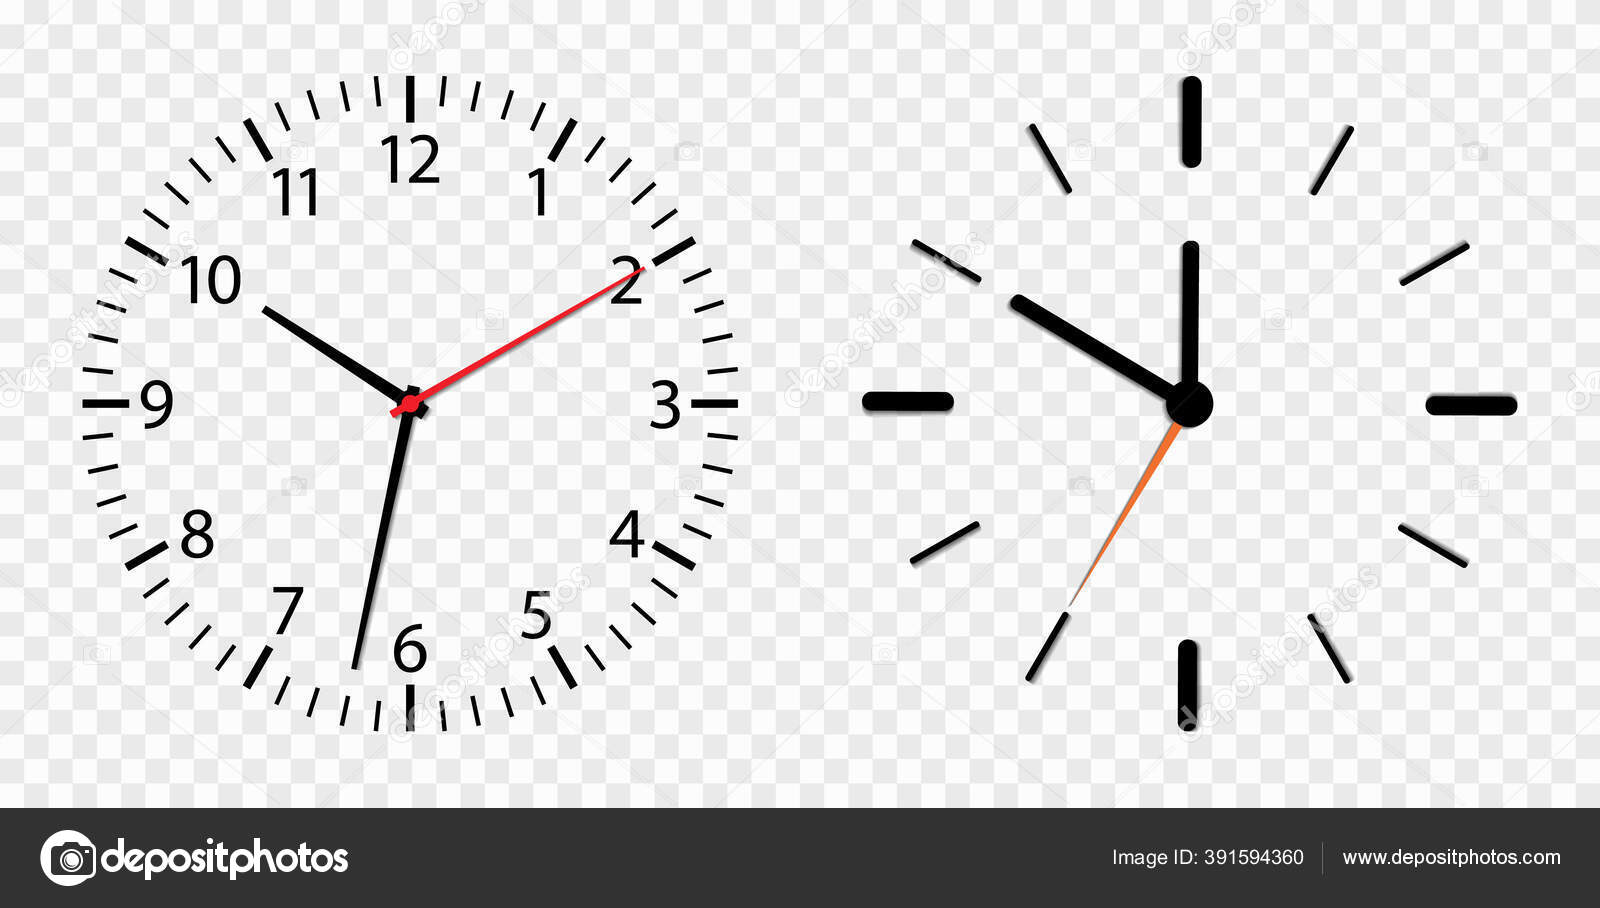 Clock face on a white background. 12 hours watch dial with round